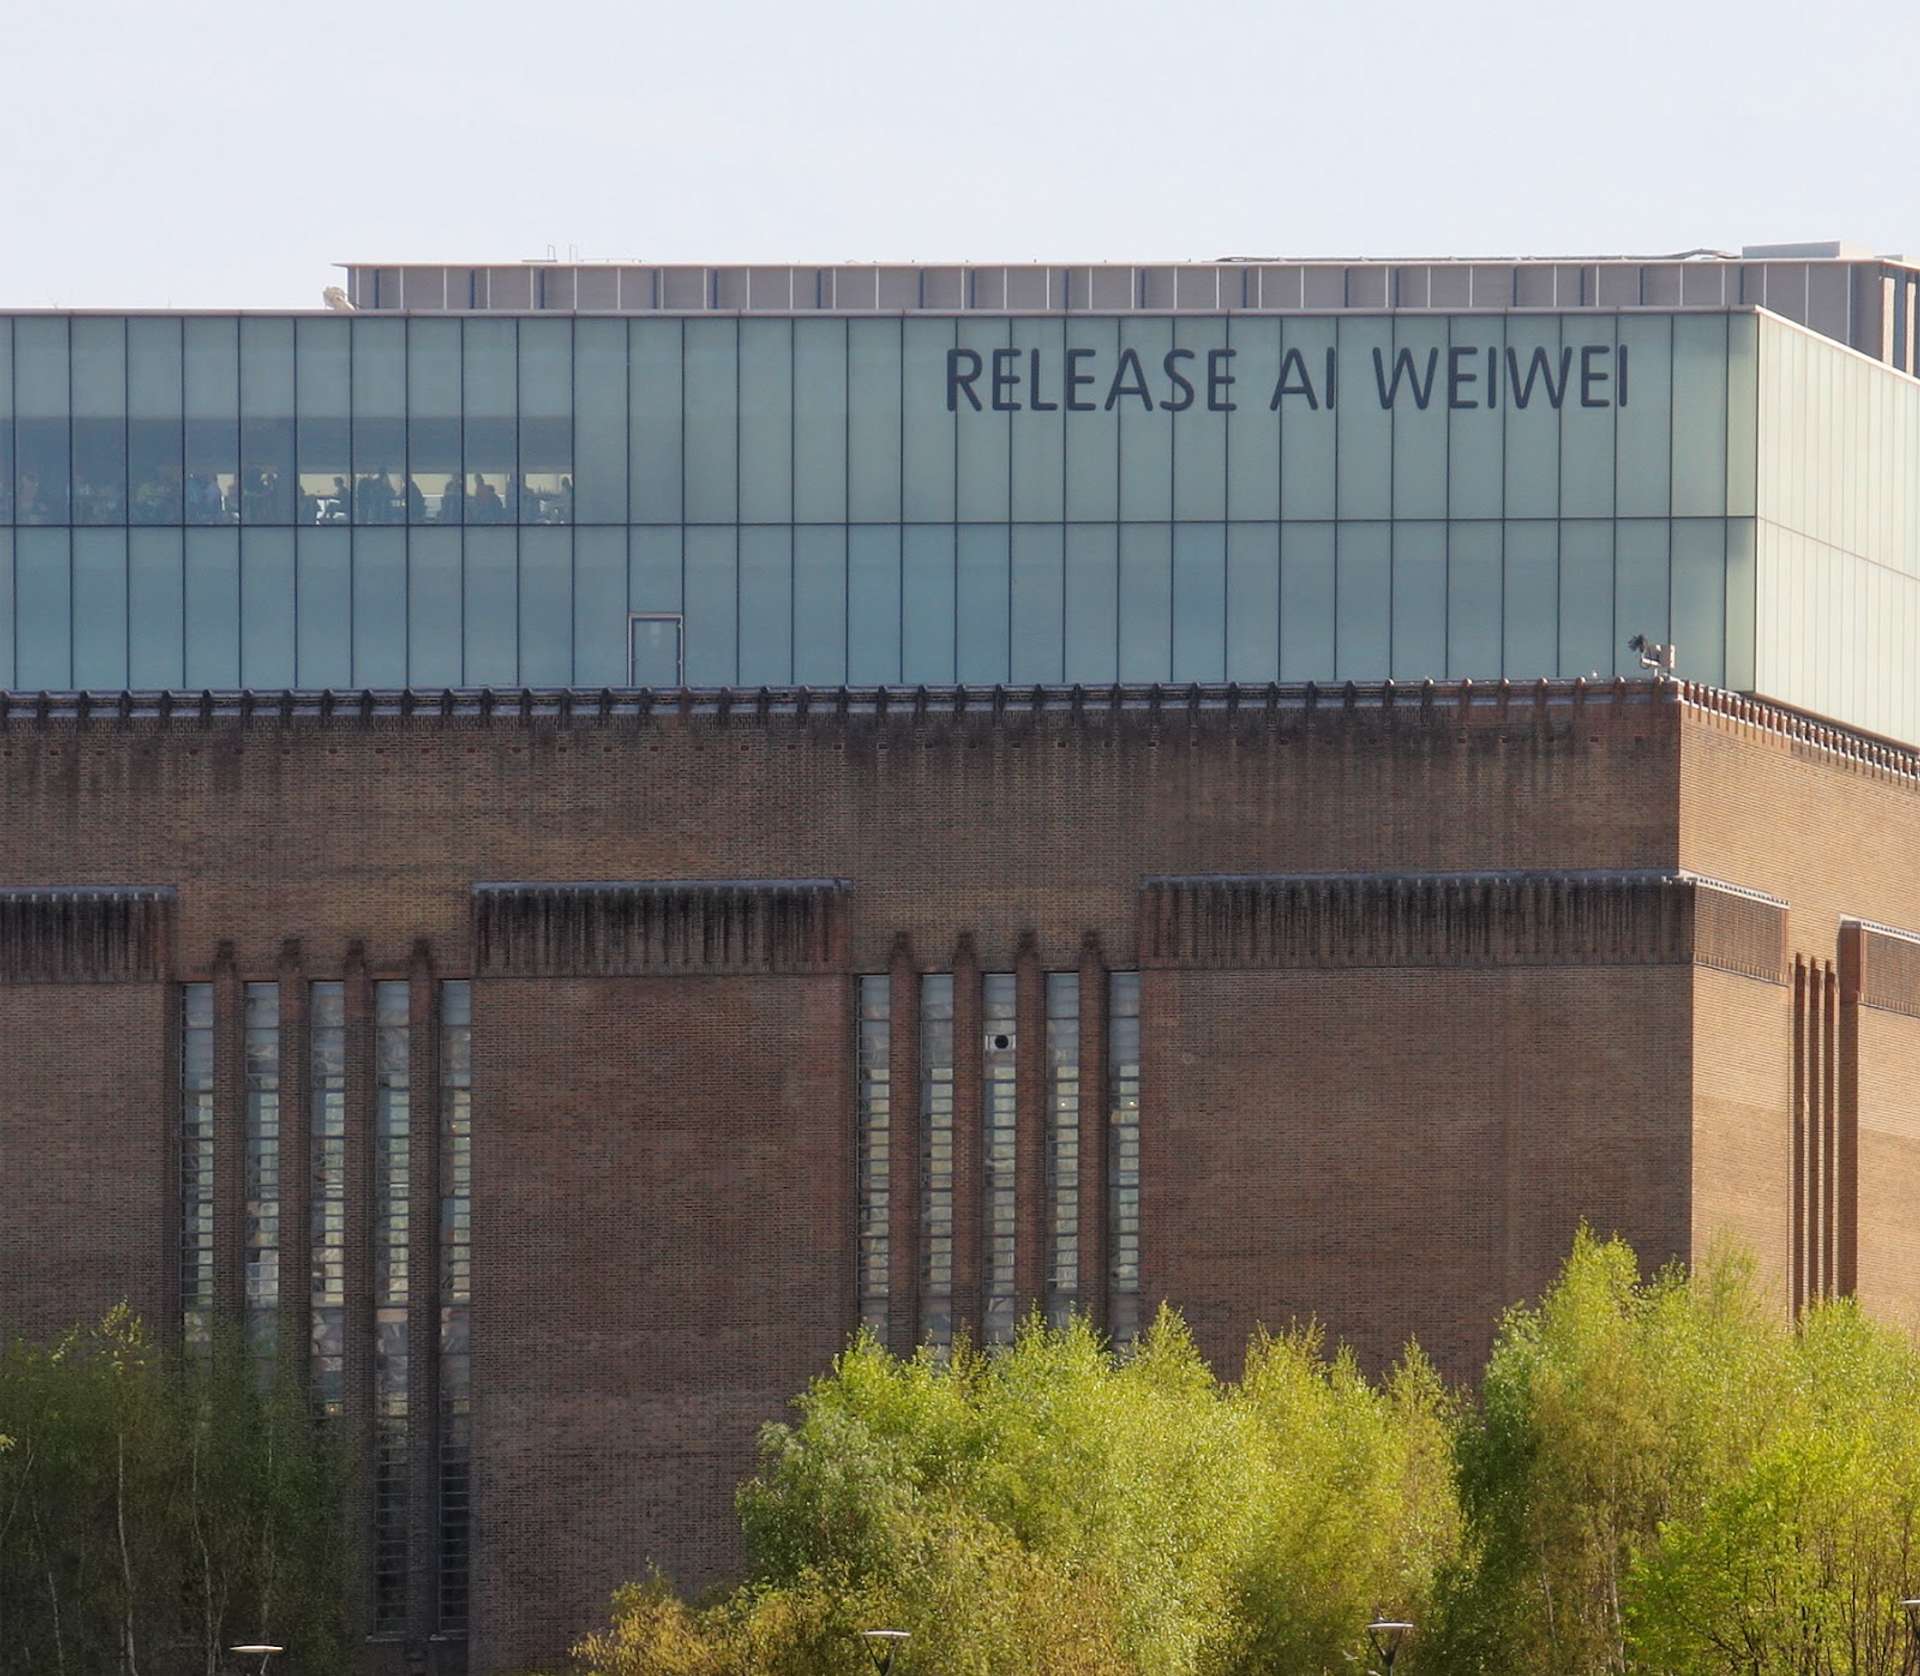 An image of Tate Modern, with an inscription saying “Release Ai Weiwei”